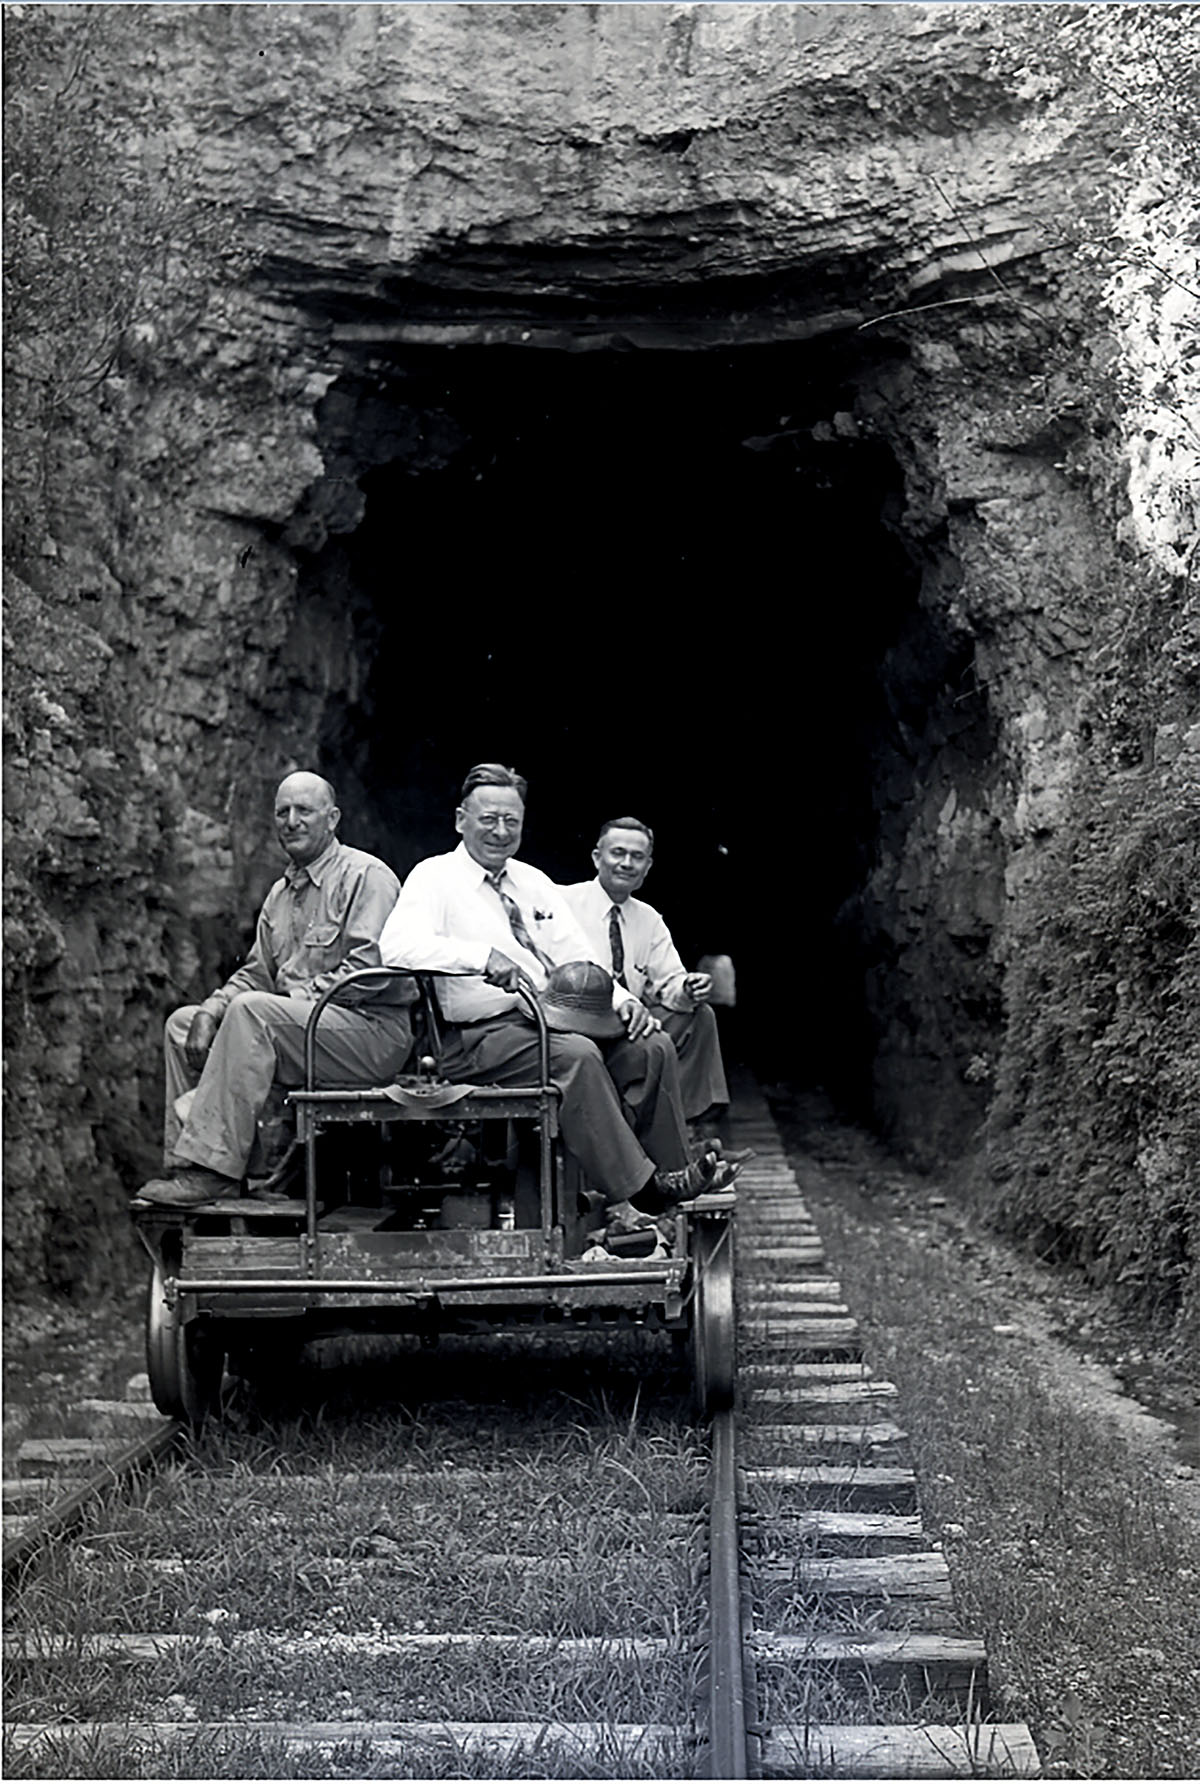 Three men in button-down shirts ride on a hand cart on train tracks going into a stone tunnel